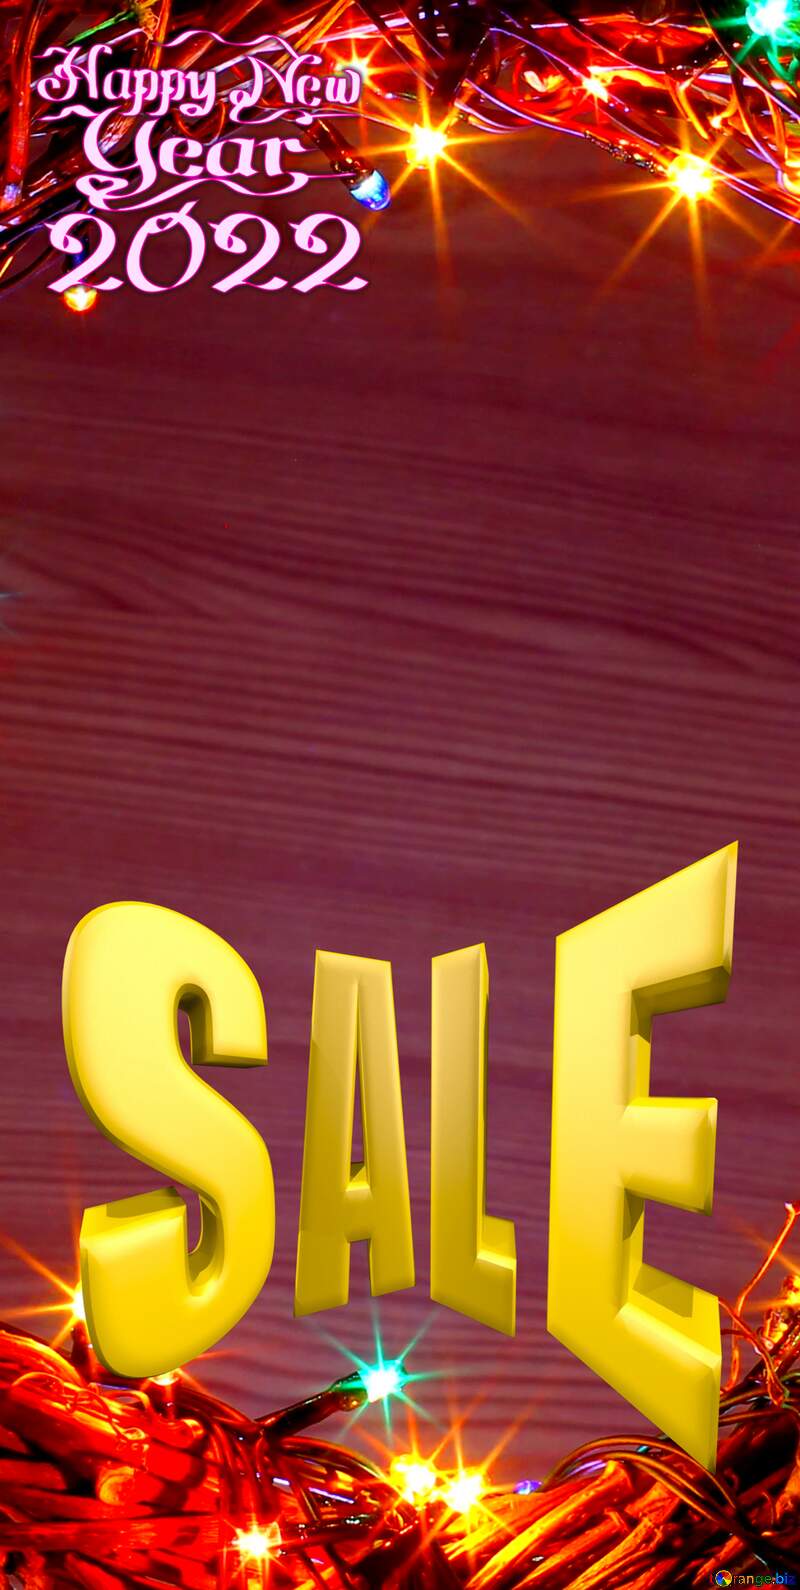 sales-2020-template-promotion-3d-letters-gold-discount-offer-background-197747.jpg